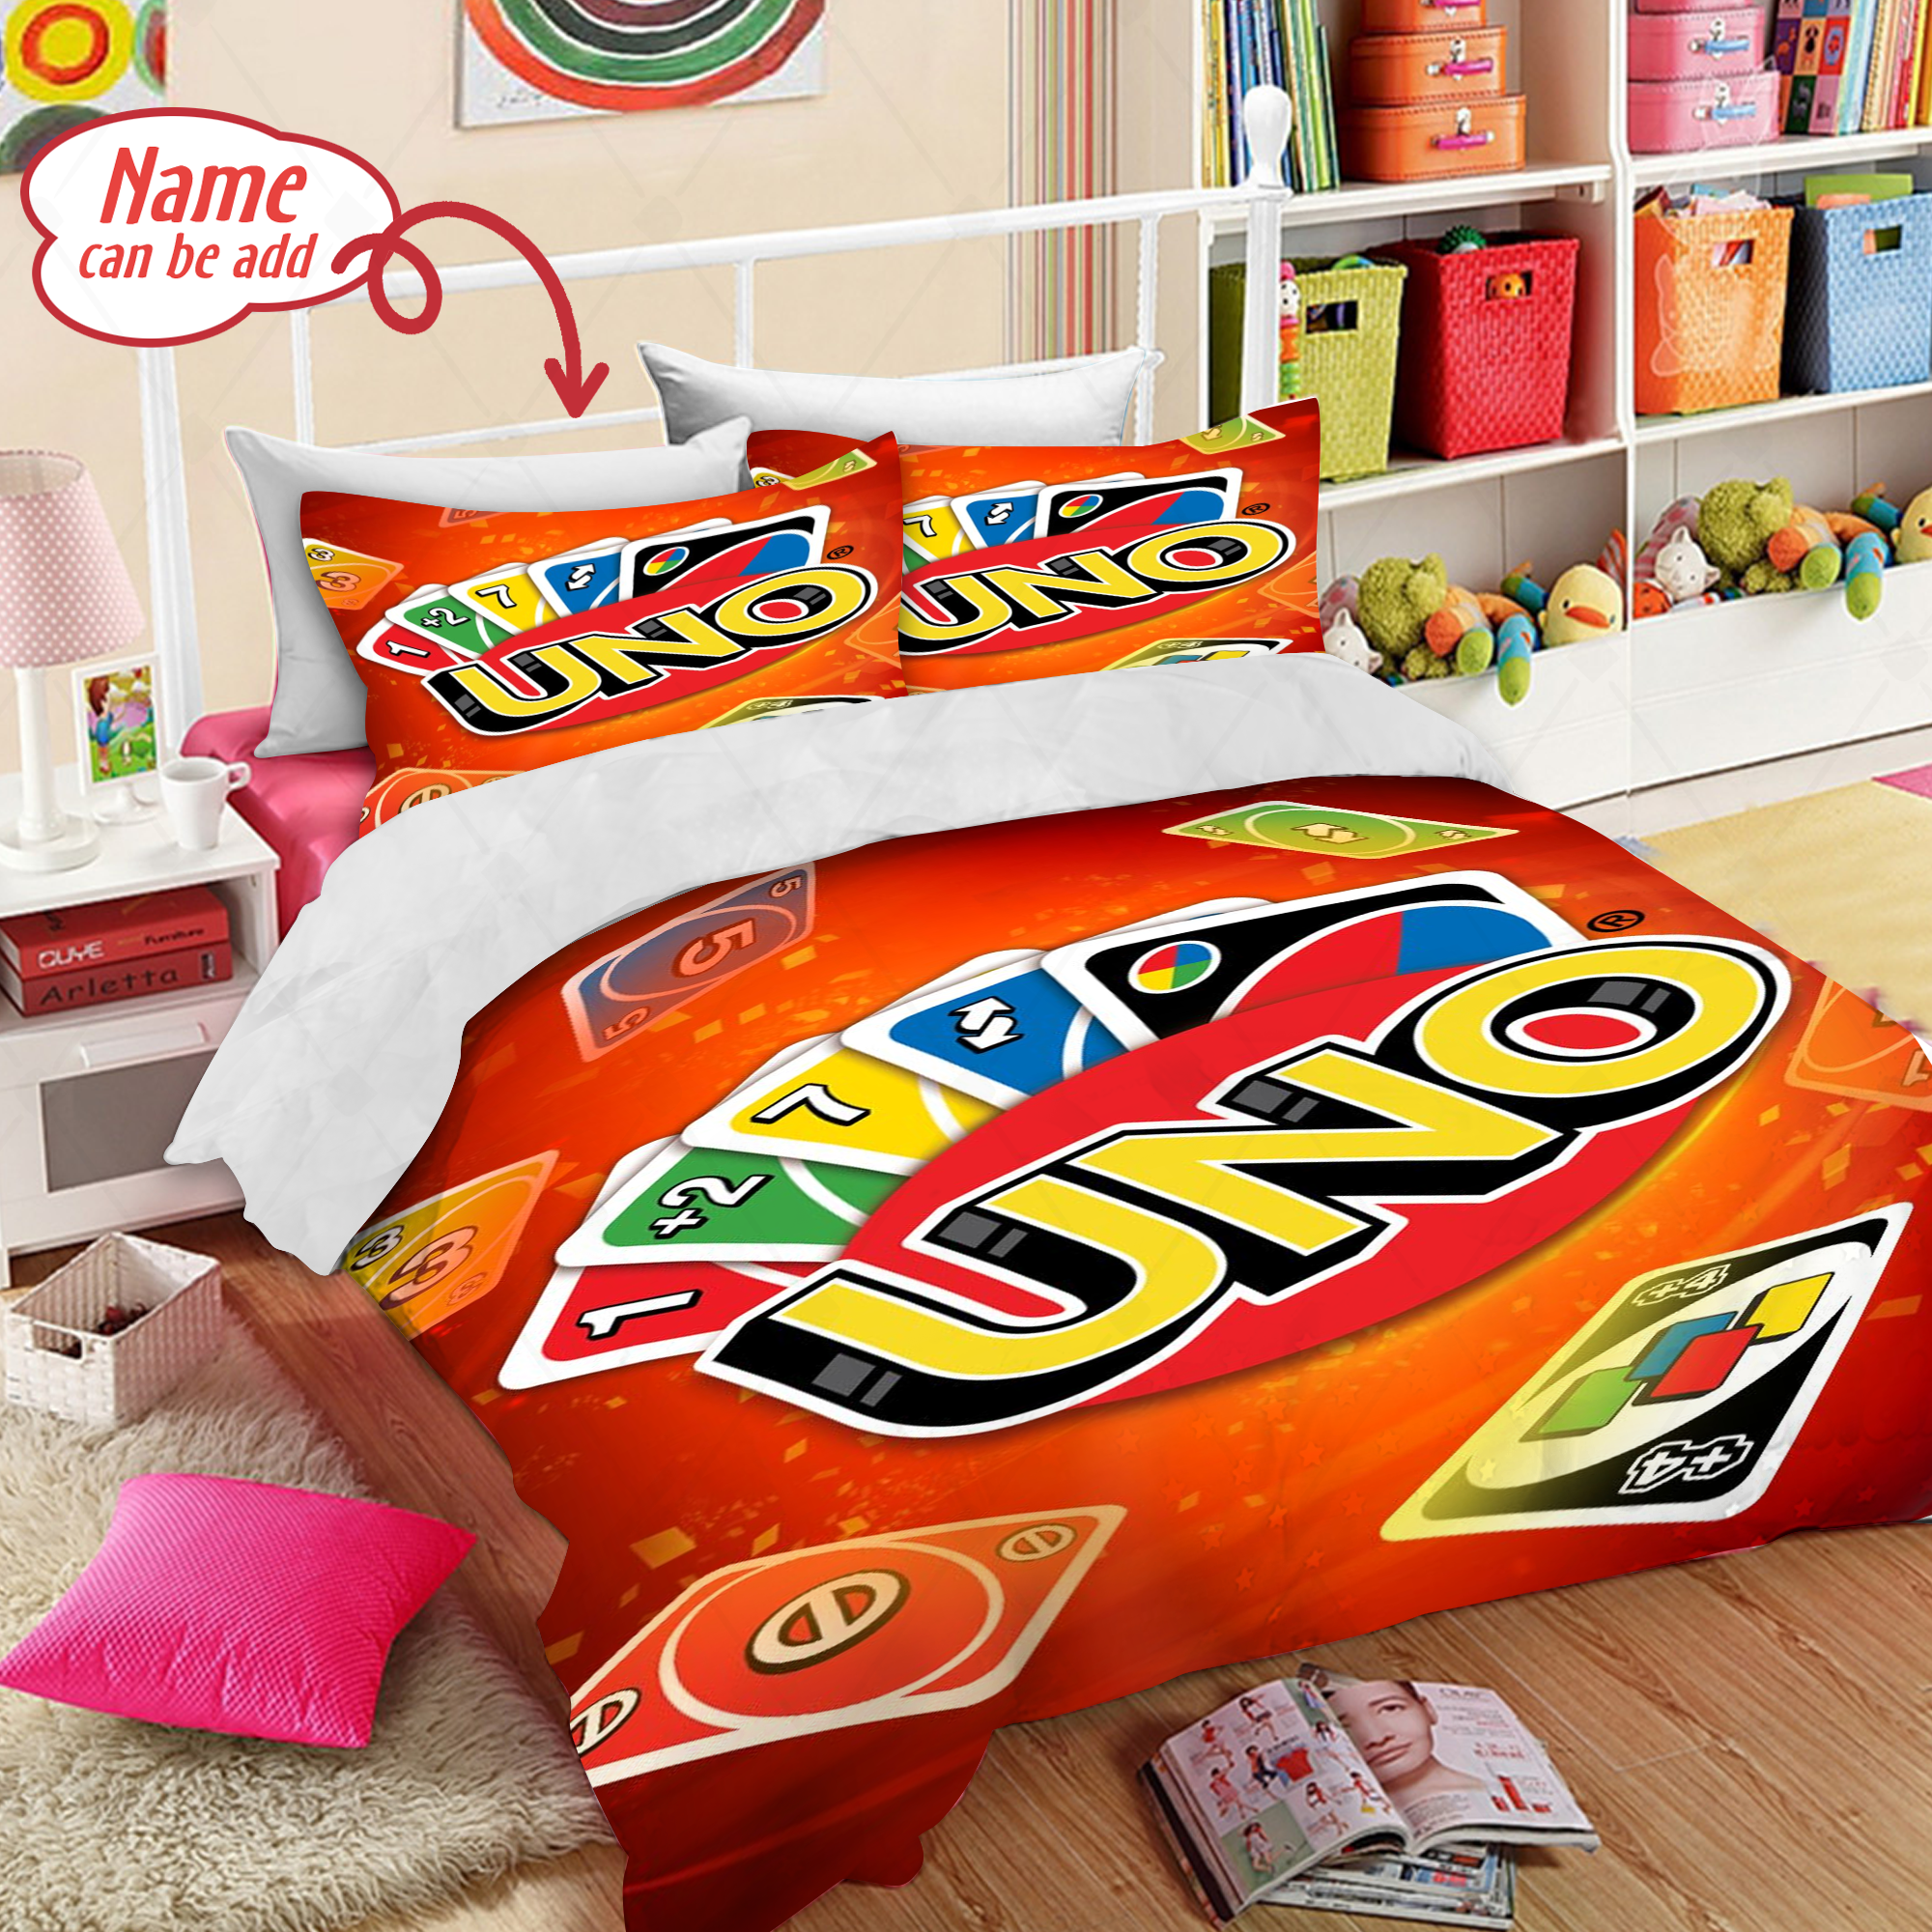 Personalized Uno Gaming Bedding Set Uno Game Duvet Cover And Pillowcase Uno Birthday Giftuno Fleece Blanket